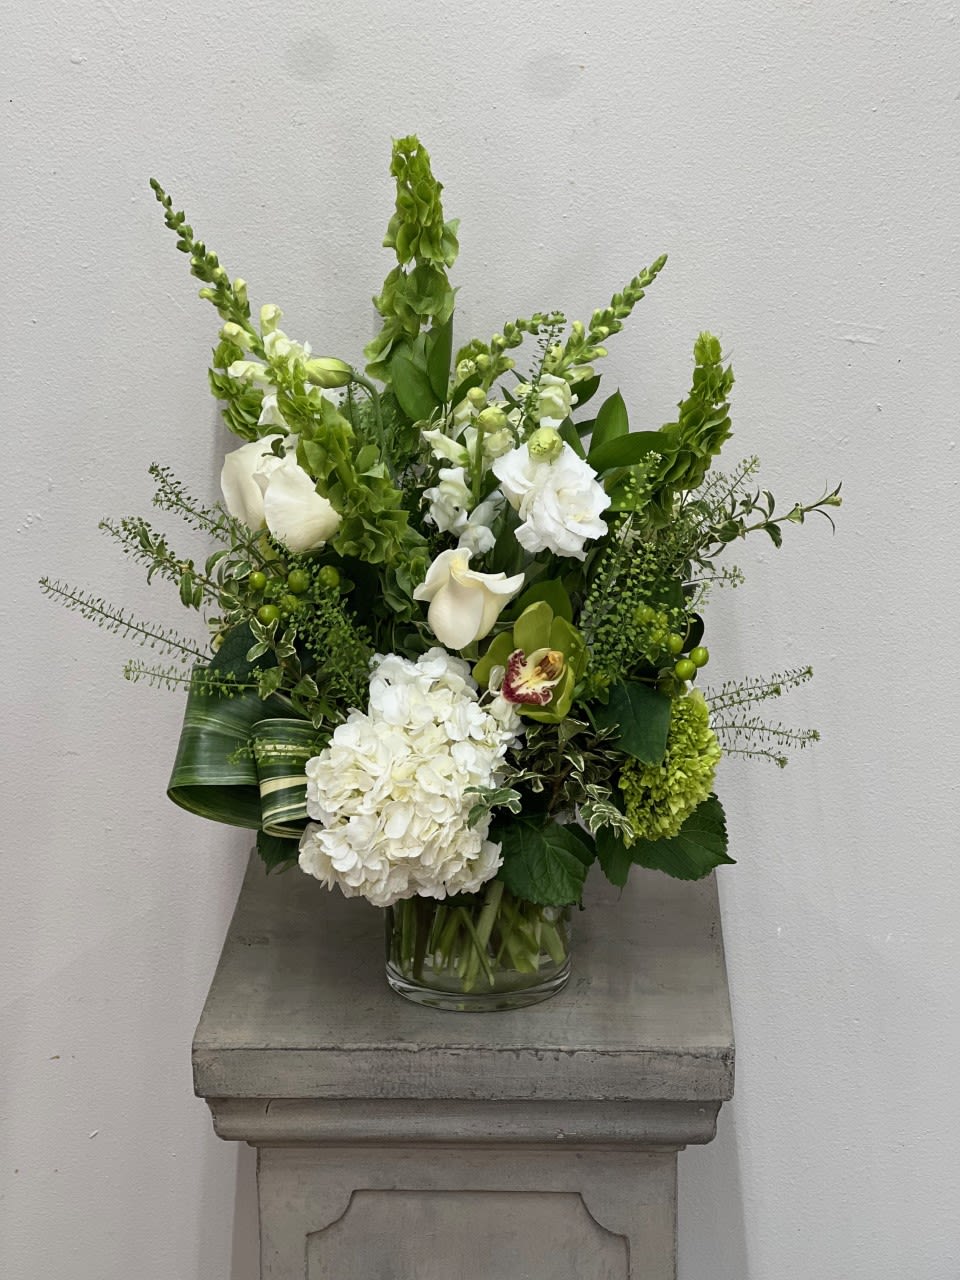 Imposing Greens Bouquet - This majestic bouquet is in a short cylinder vase but the greens sure take it to a new height. Elegant and clean, this bouquet is sure to wow them all.   Flowers and colors may vary depending on availability. 